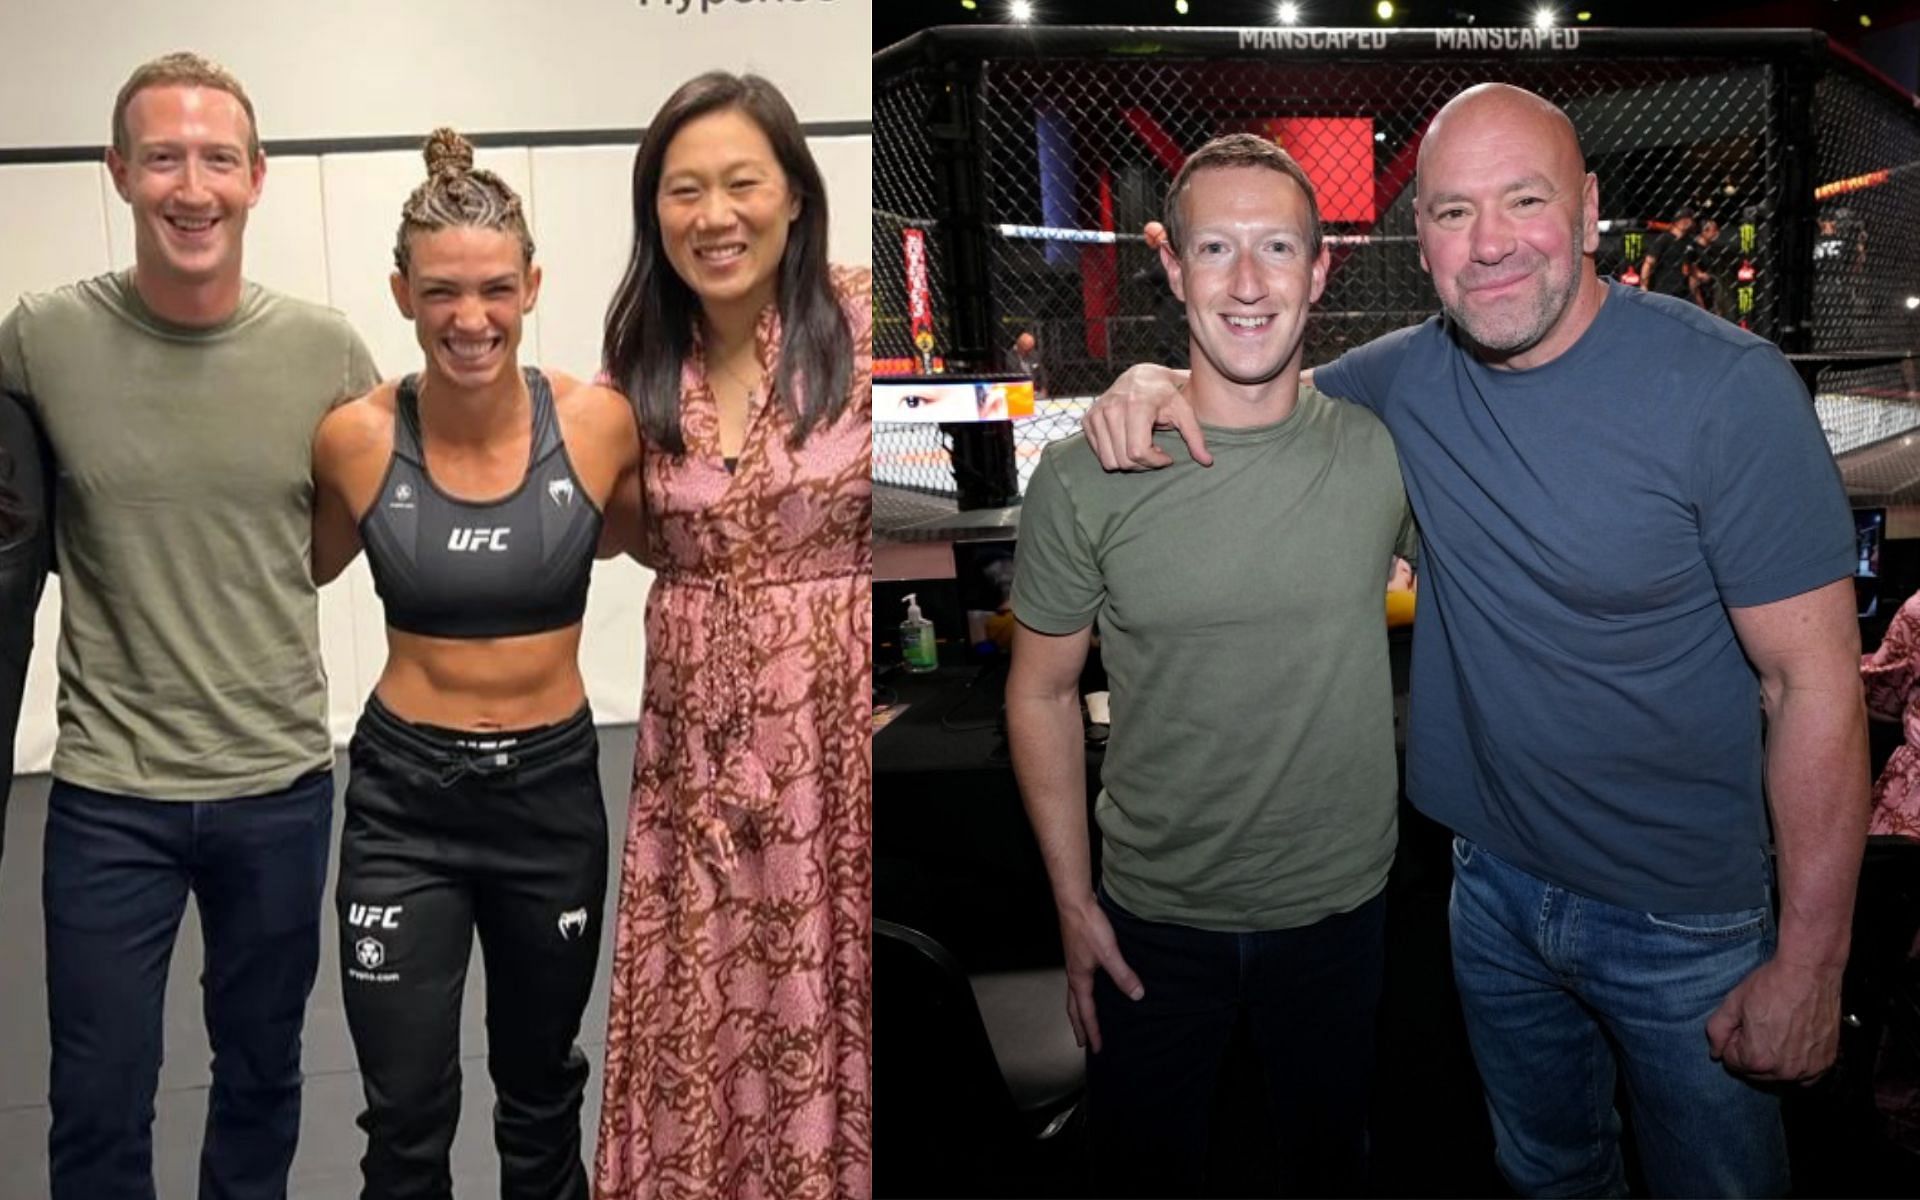 Mackenzie Dern with Mark Zuckerberg and his wife (left) and Zuckerberg with Dana White (right). [Images courtesy: left image from Instagram @zuck and right image from Getty Images]